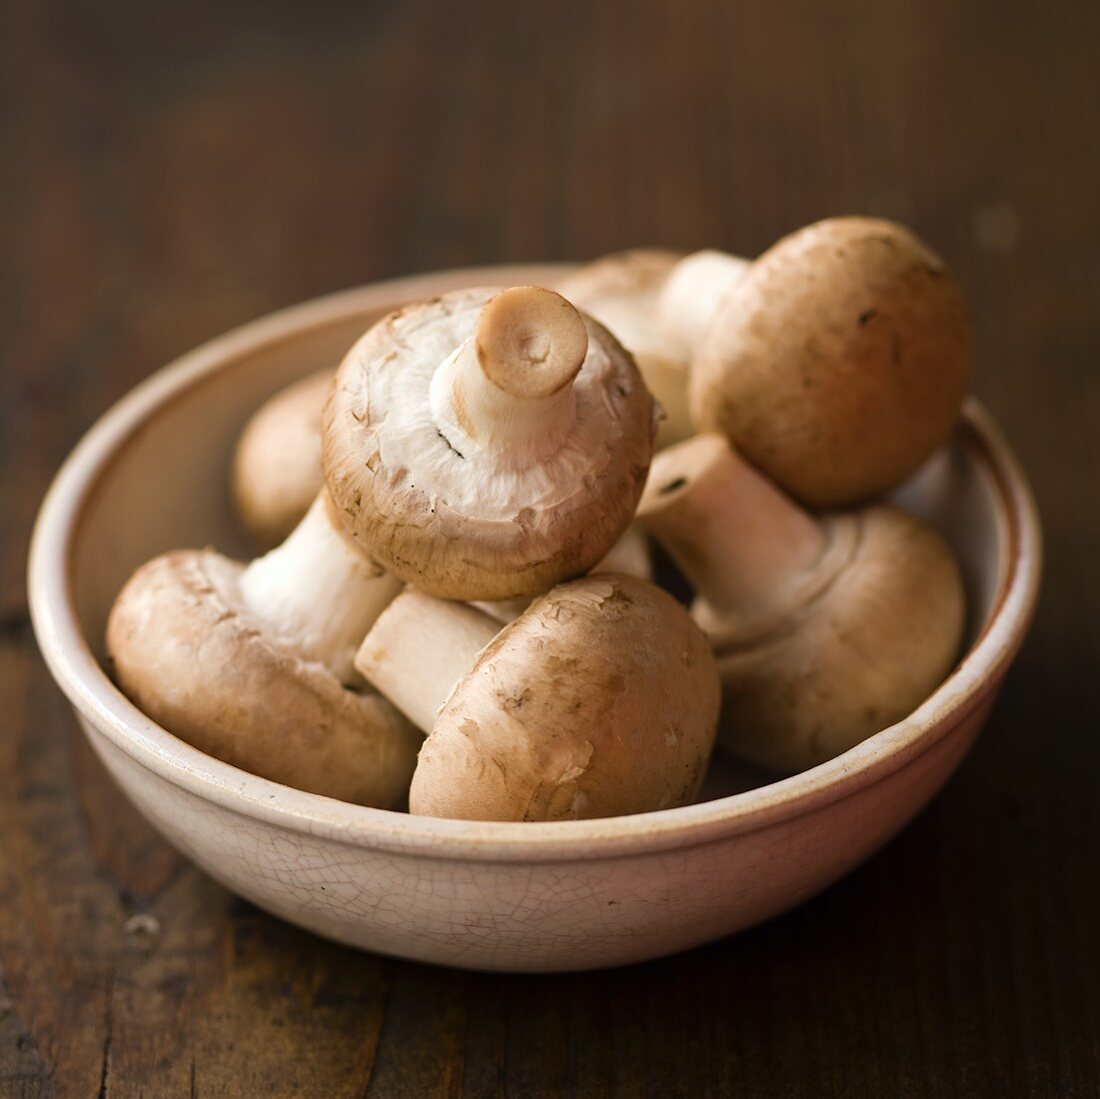 Brown button mushrooms in a dish